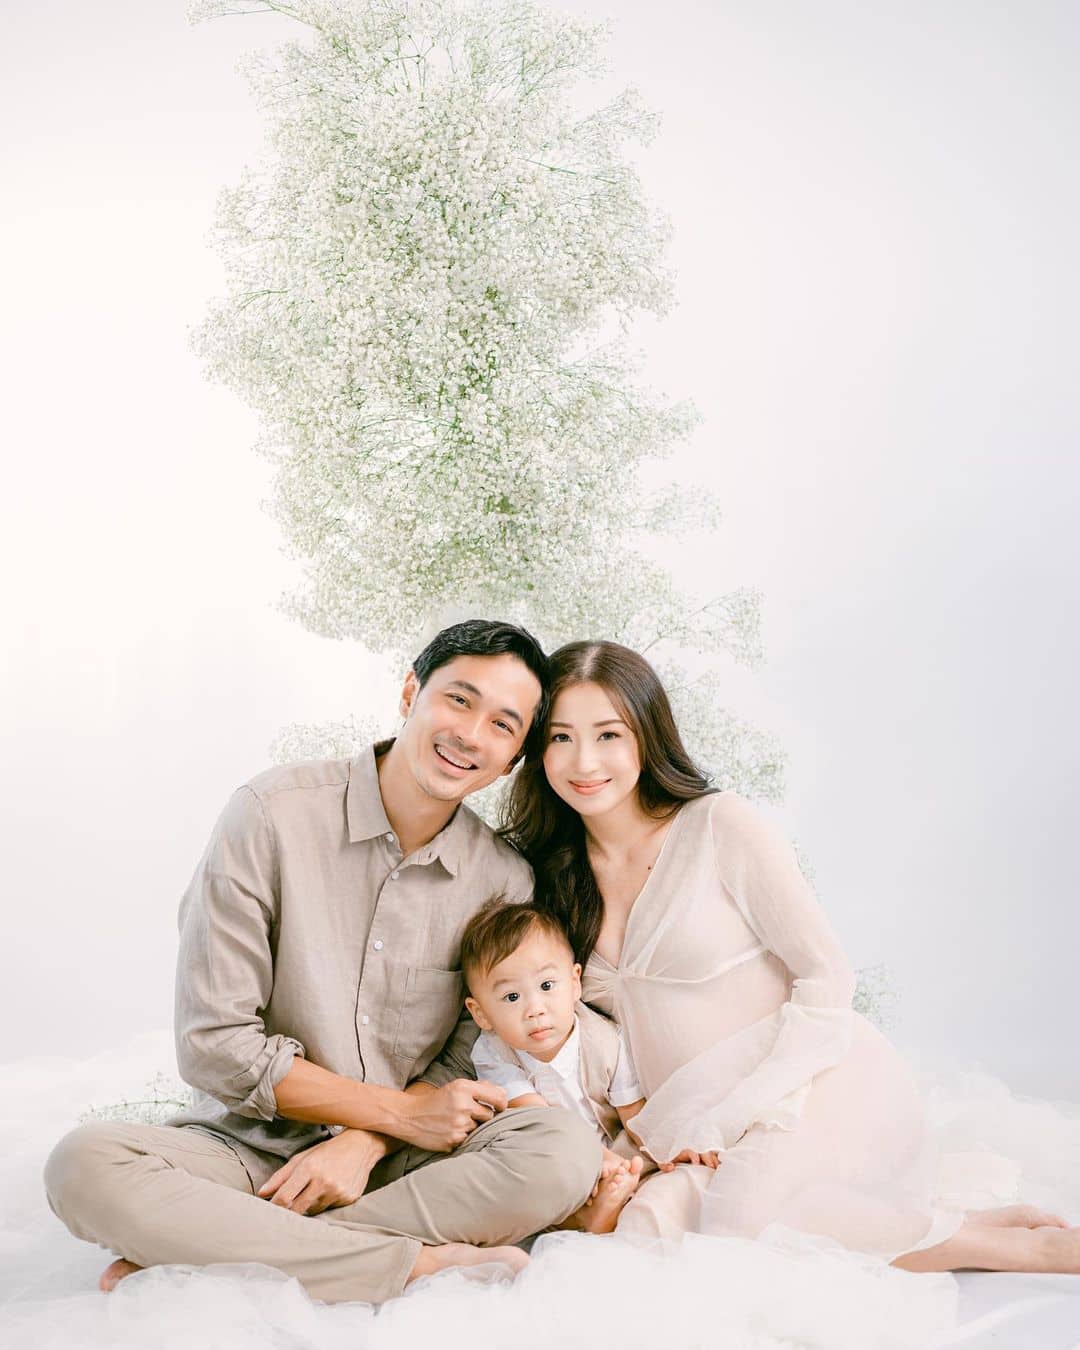 Kryz Uy and Slater Young pen sweet messages for Scottie's second birthday